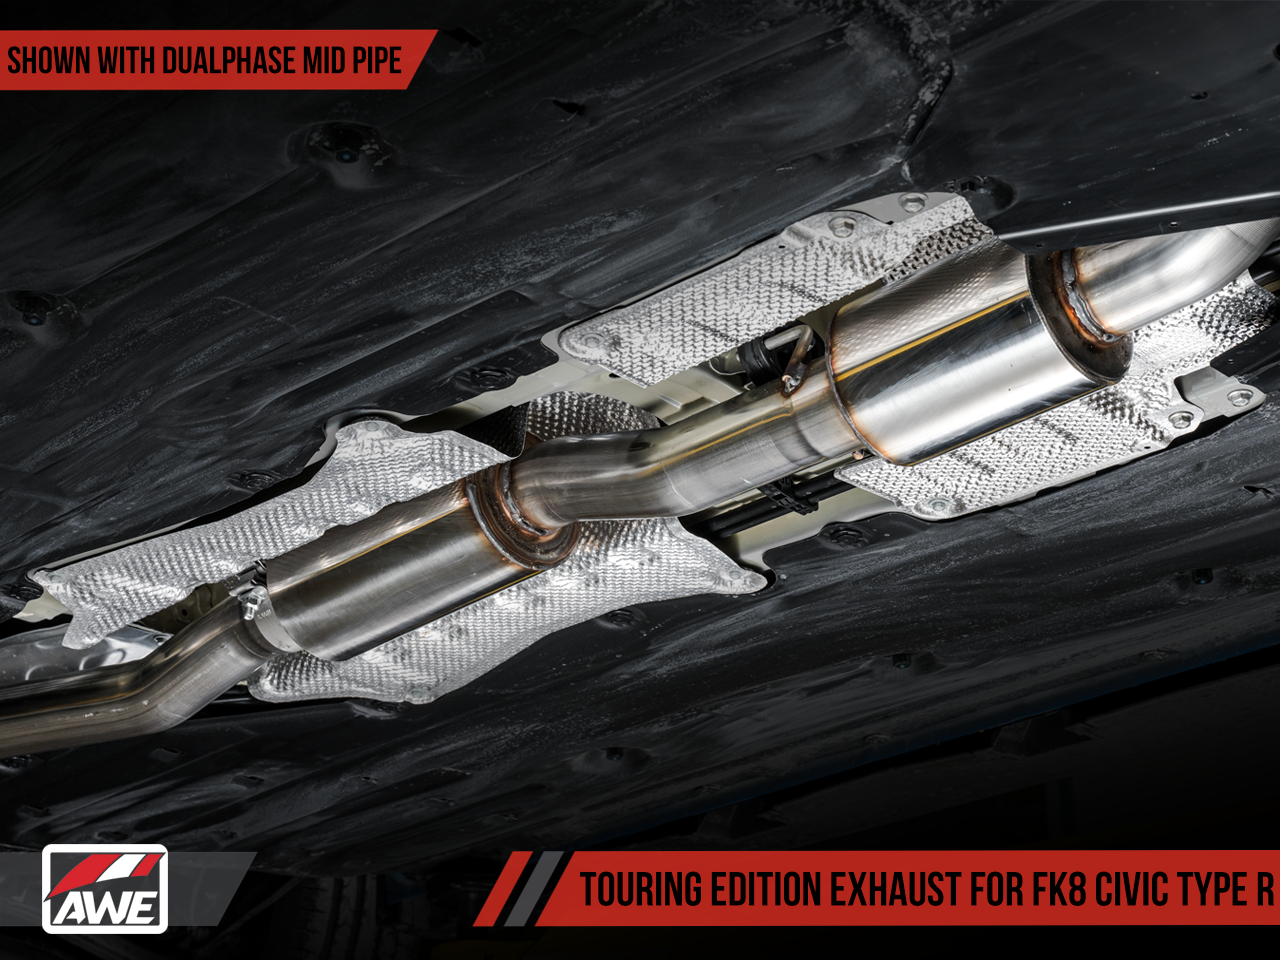 AWE Touring Edition Exhaust for FK8 Civic Type R (includes Front Pipe and DualPhase Mid Pipe) - Triple Diamond Black Tips (3015-43000)